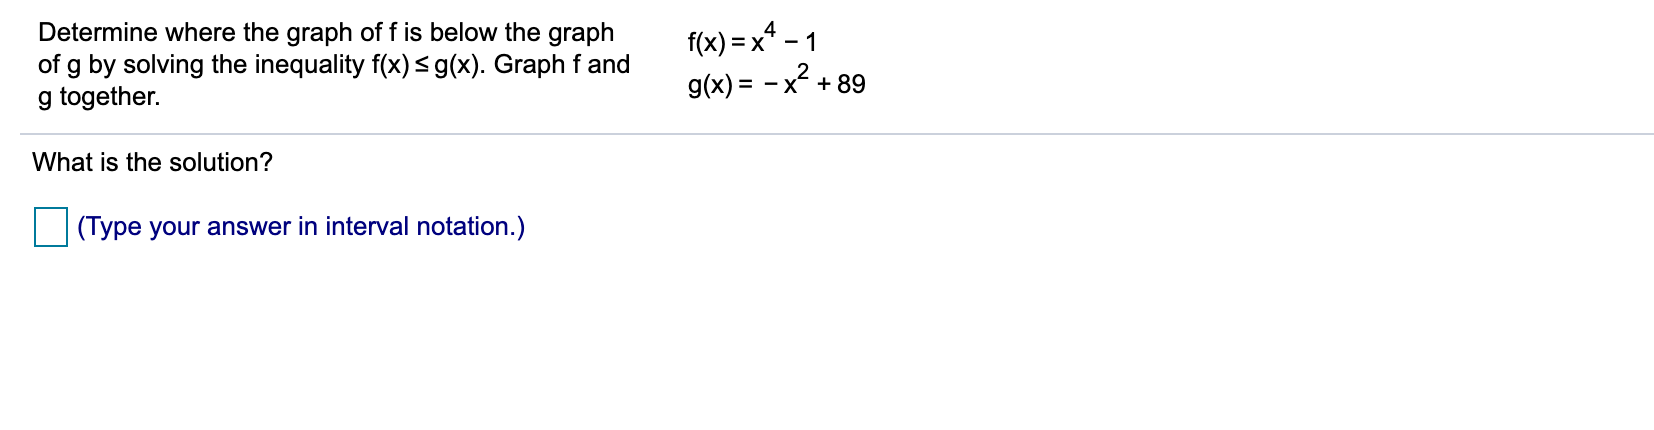 f(x) =x* - 1
Determine where the graph of f is below the graph
of g by solving the inequality f(x)<g(x). Graph fand
g together.
g(x) = - x² + 89
What is the solution?
(Type your answer in interval notation.)
